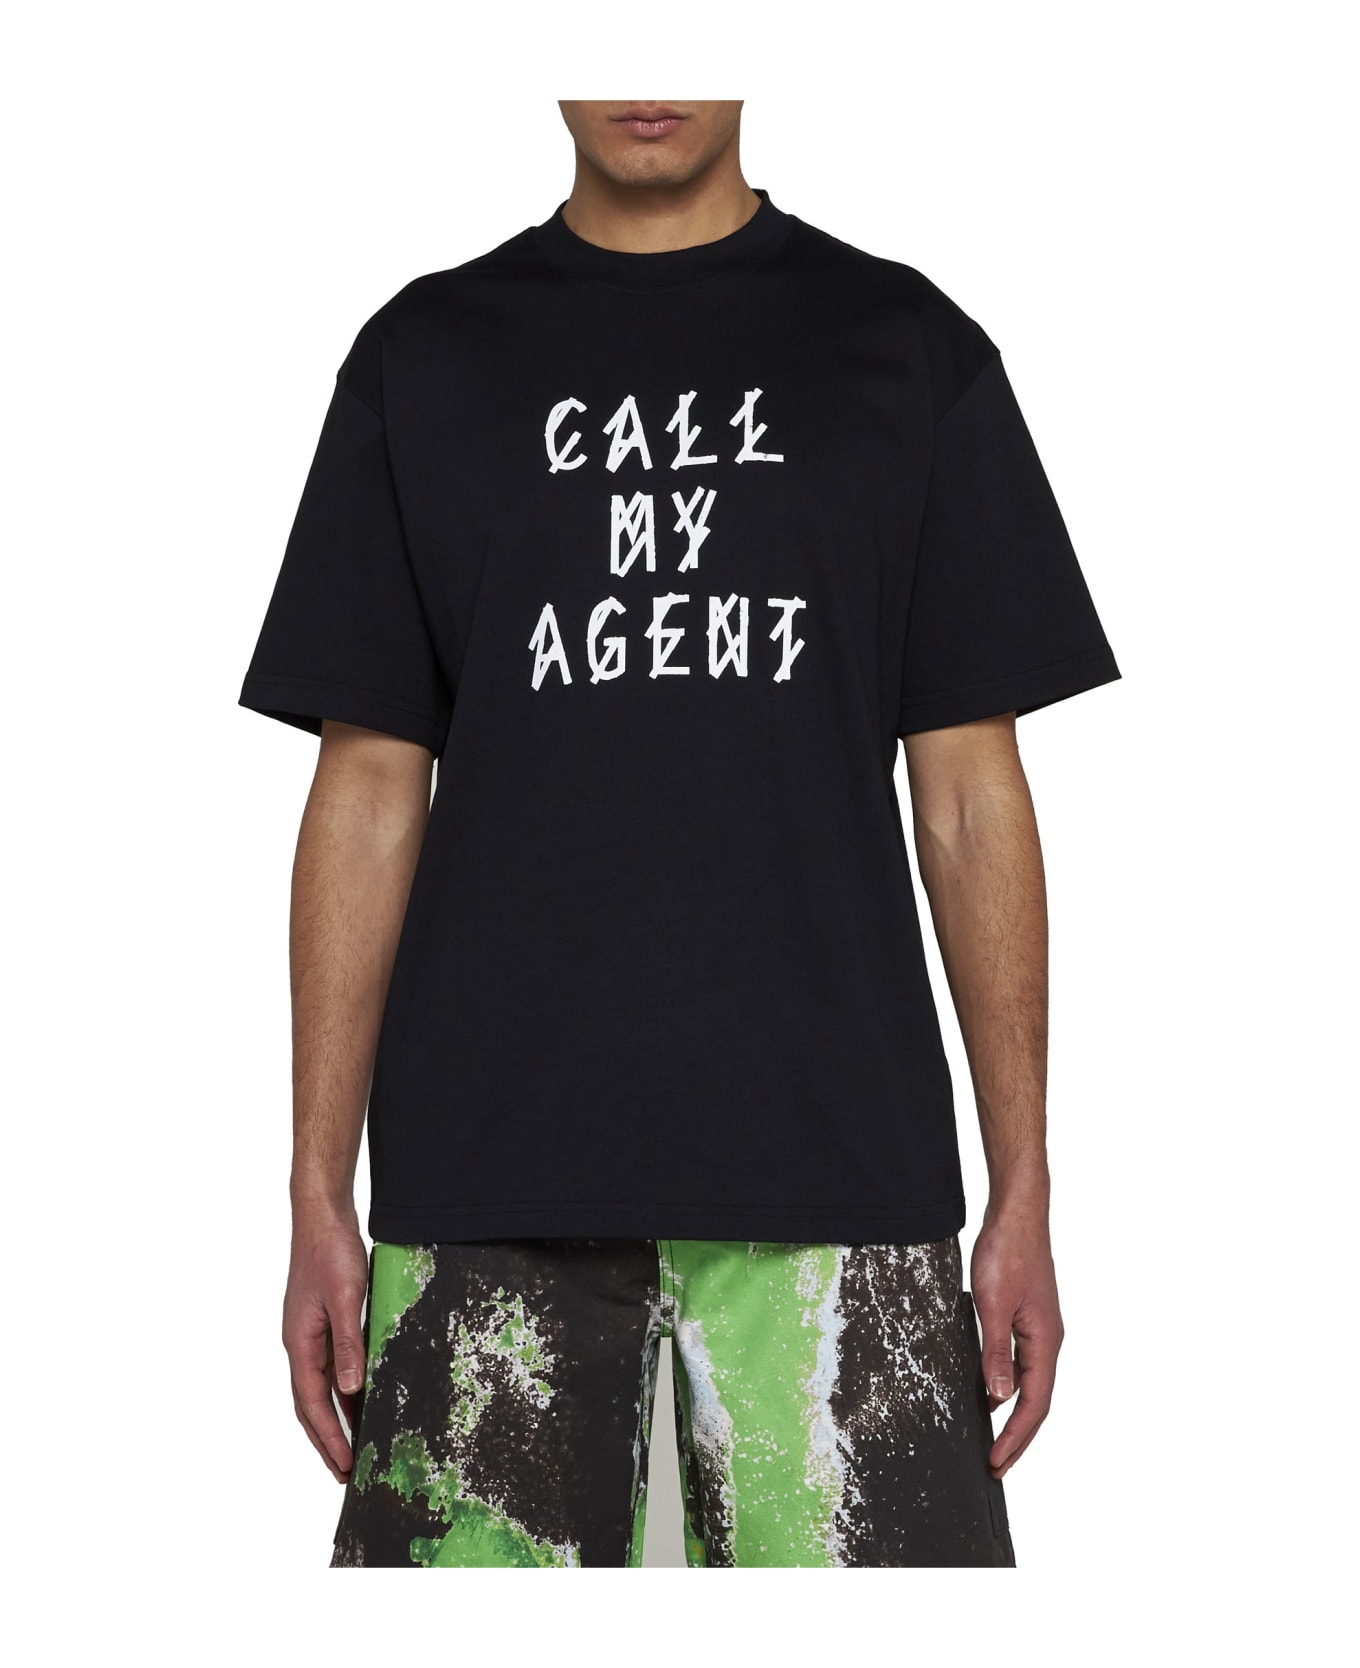 44 Label Group T-Shirt - Black+call my agent シャツ